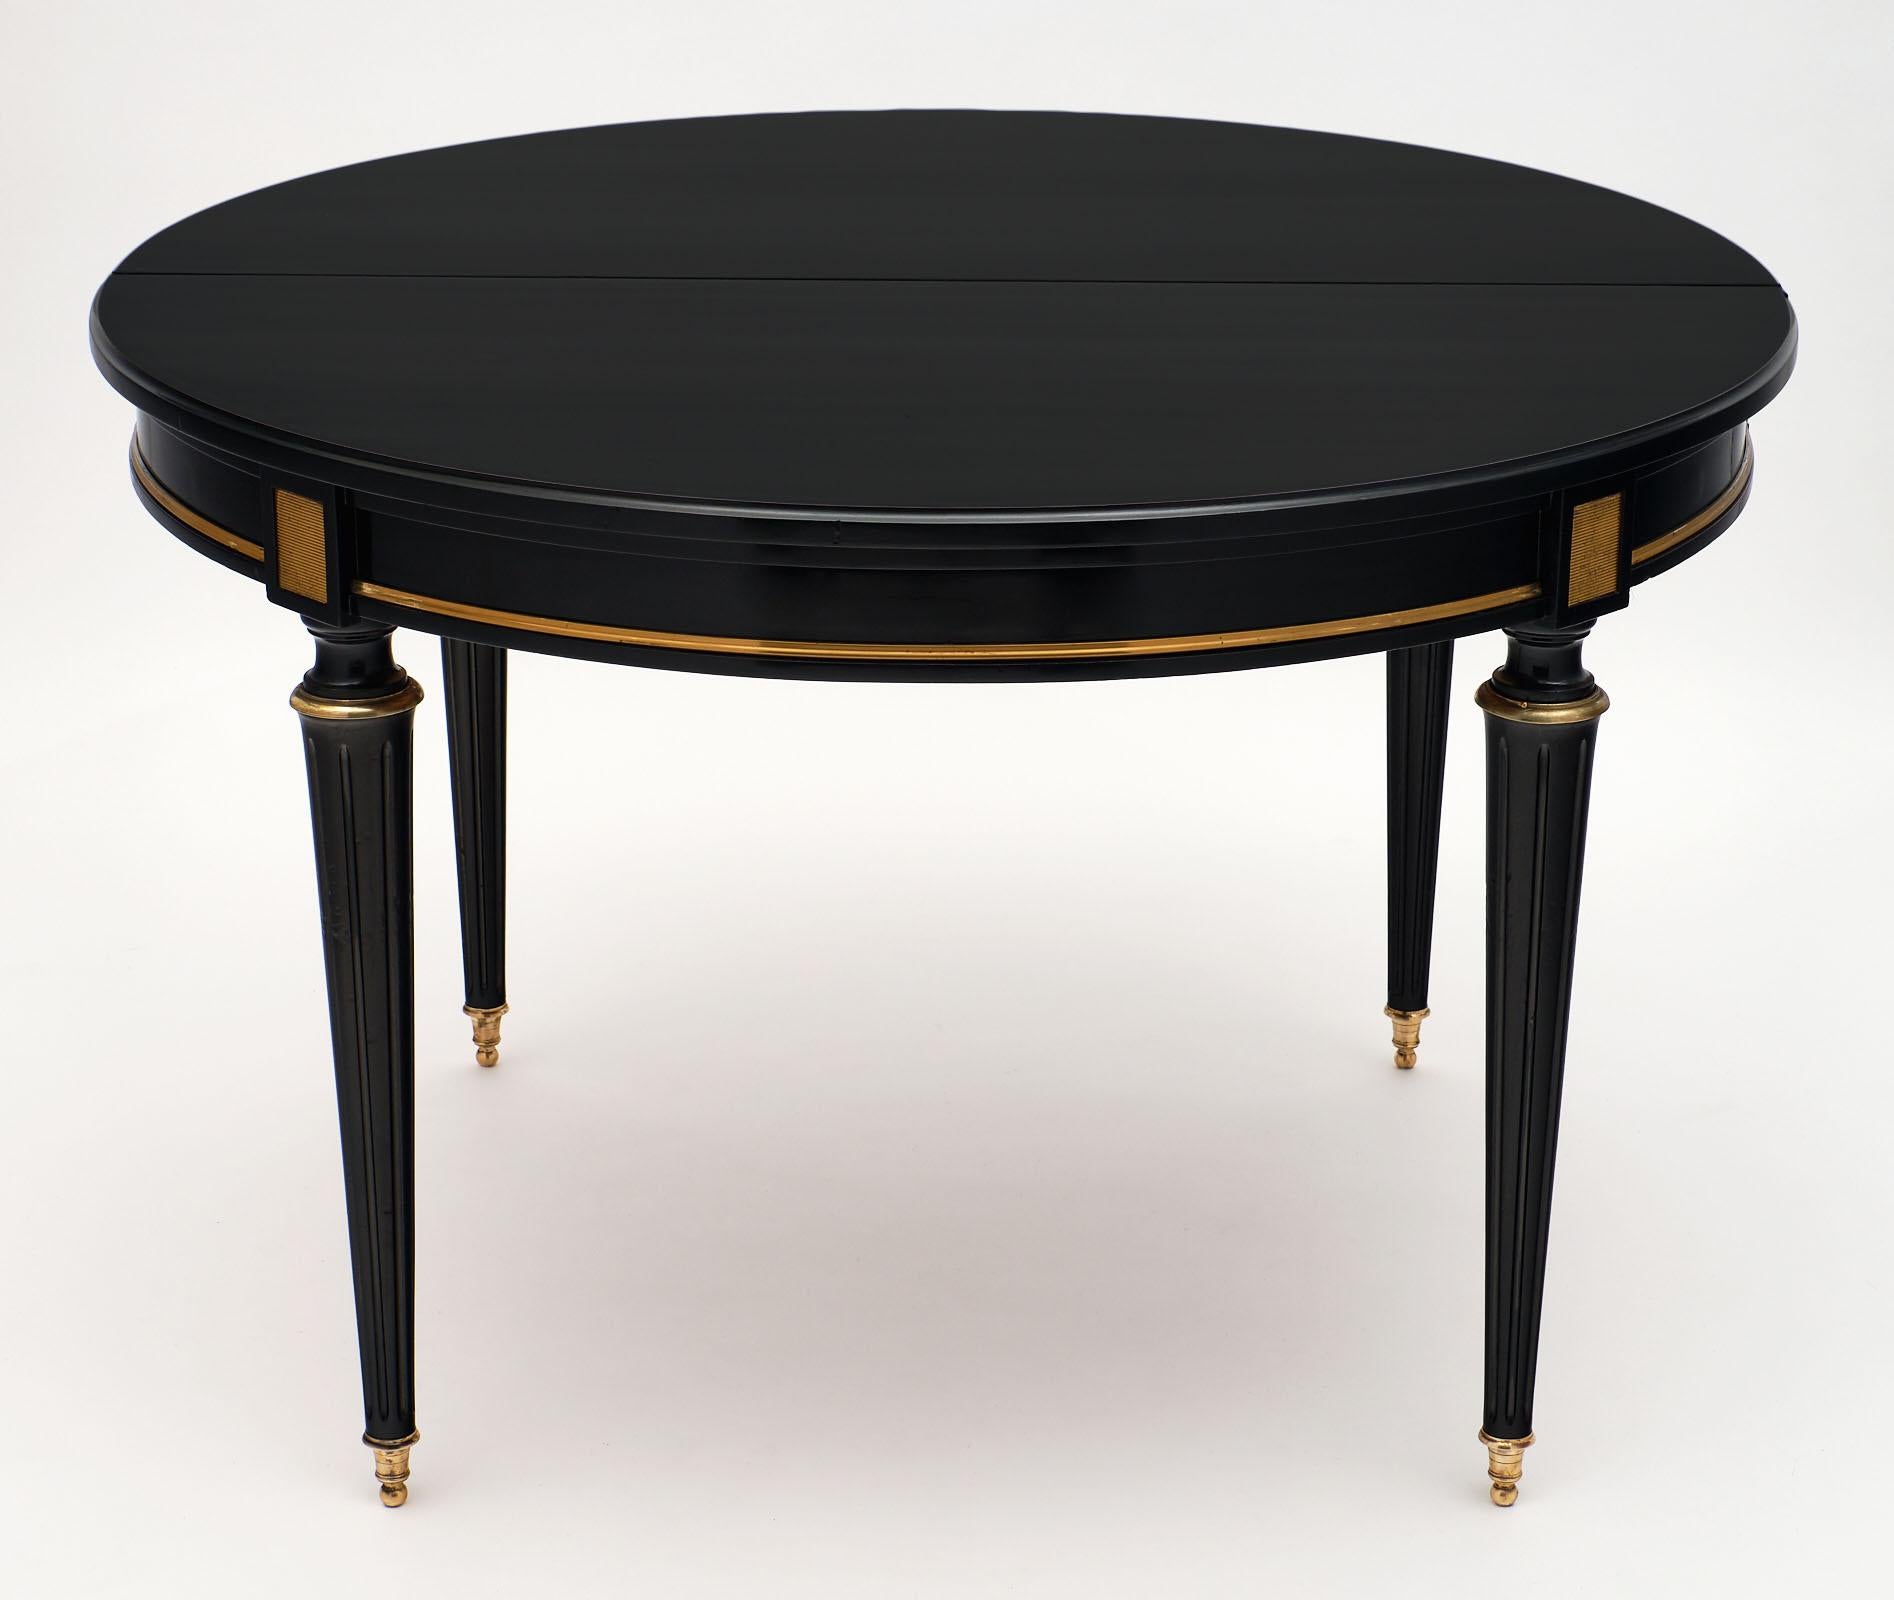 Antique ebonized dining table with leaves made of solid mahogany and featuring gold brass trims. We love the round shape that expands with leaves, and the tapered and fluted legs. The feet are capped with bronze, a classic accent of the Louis XVI